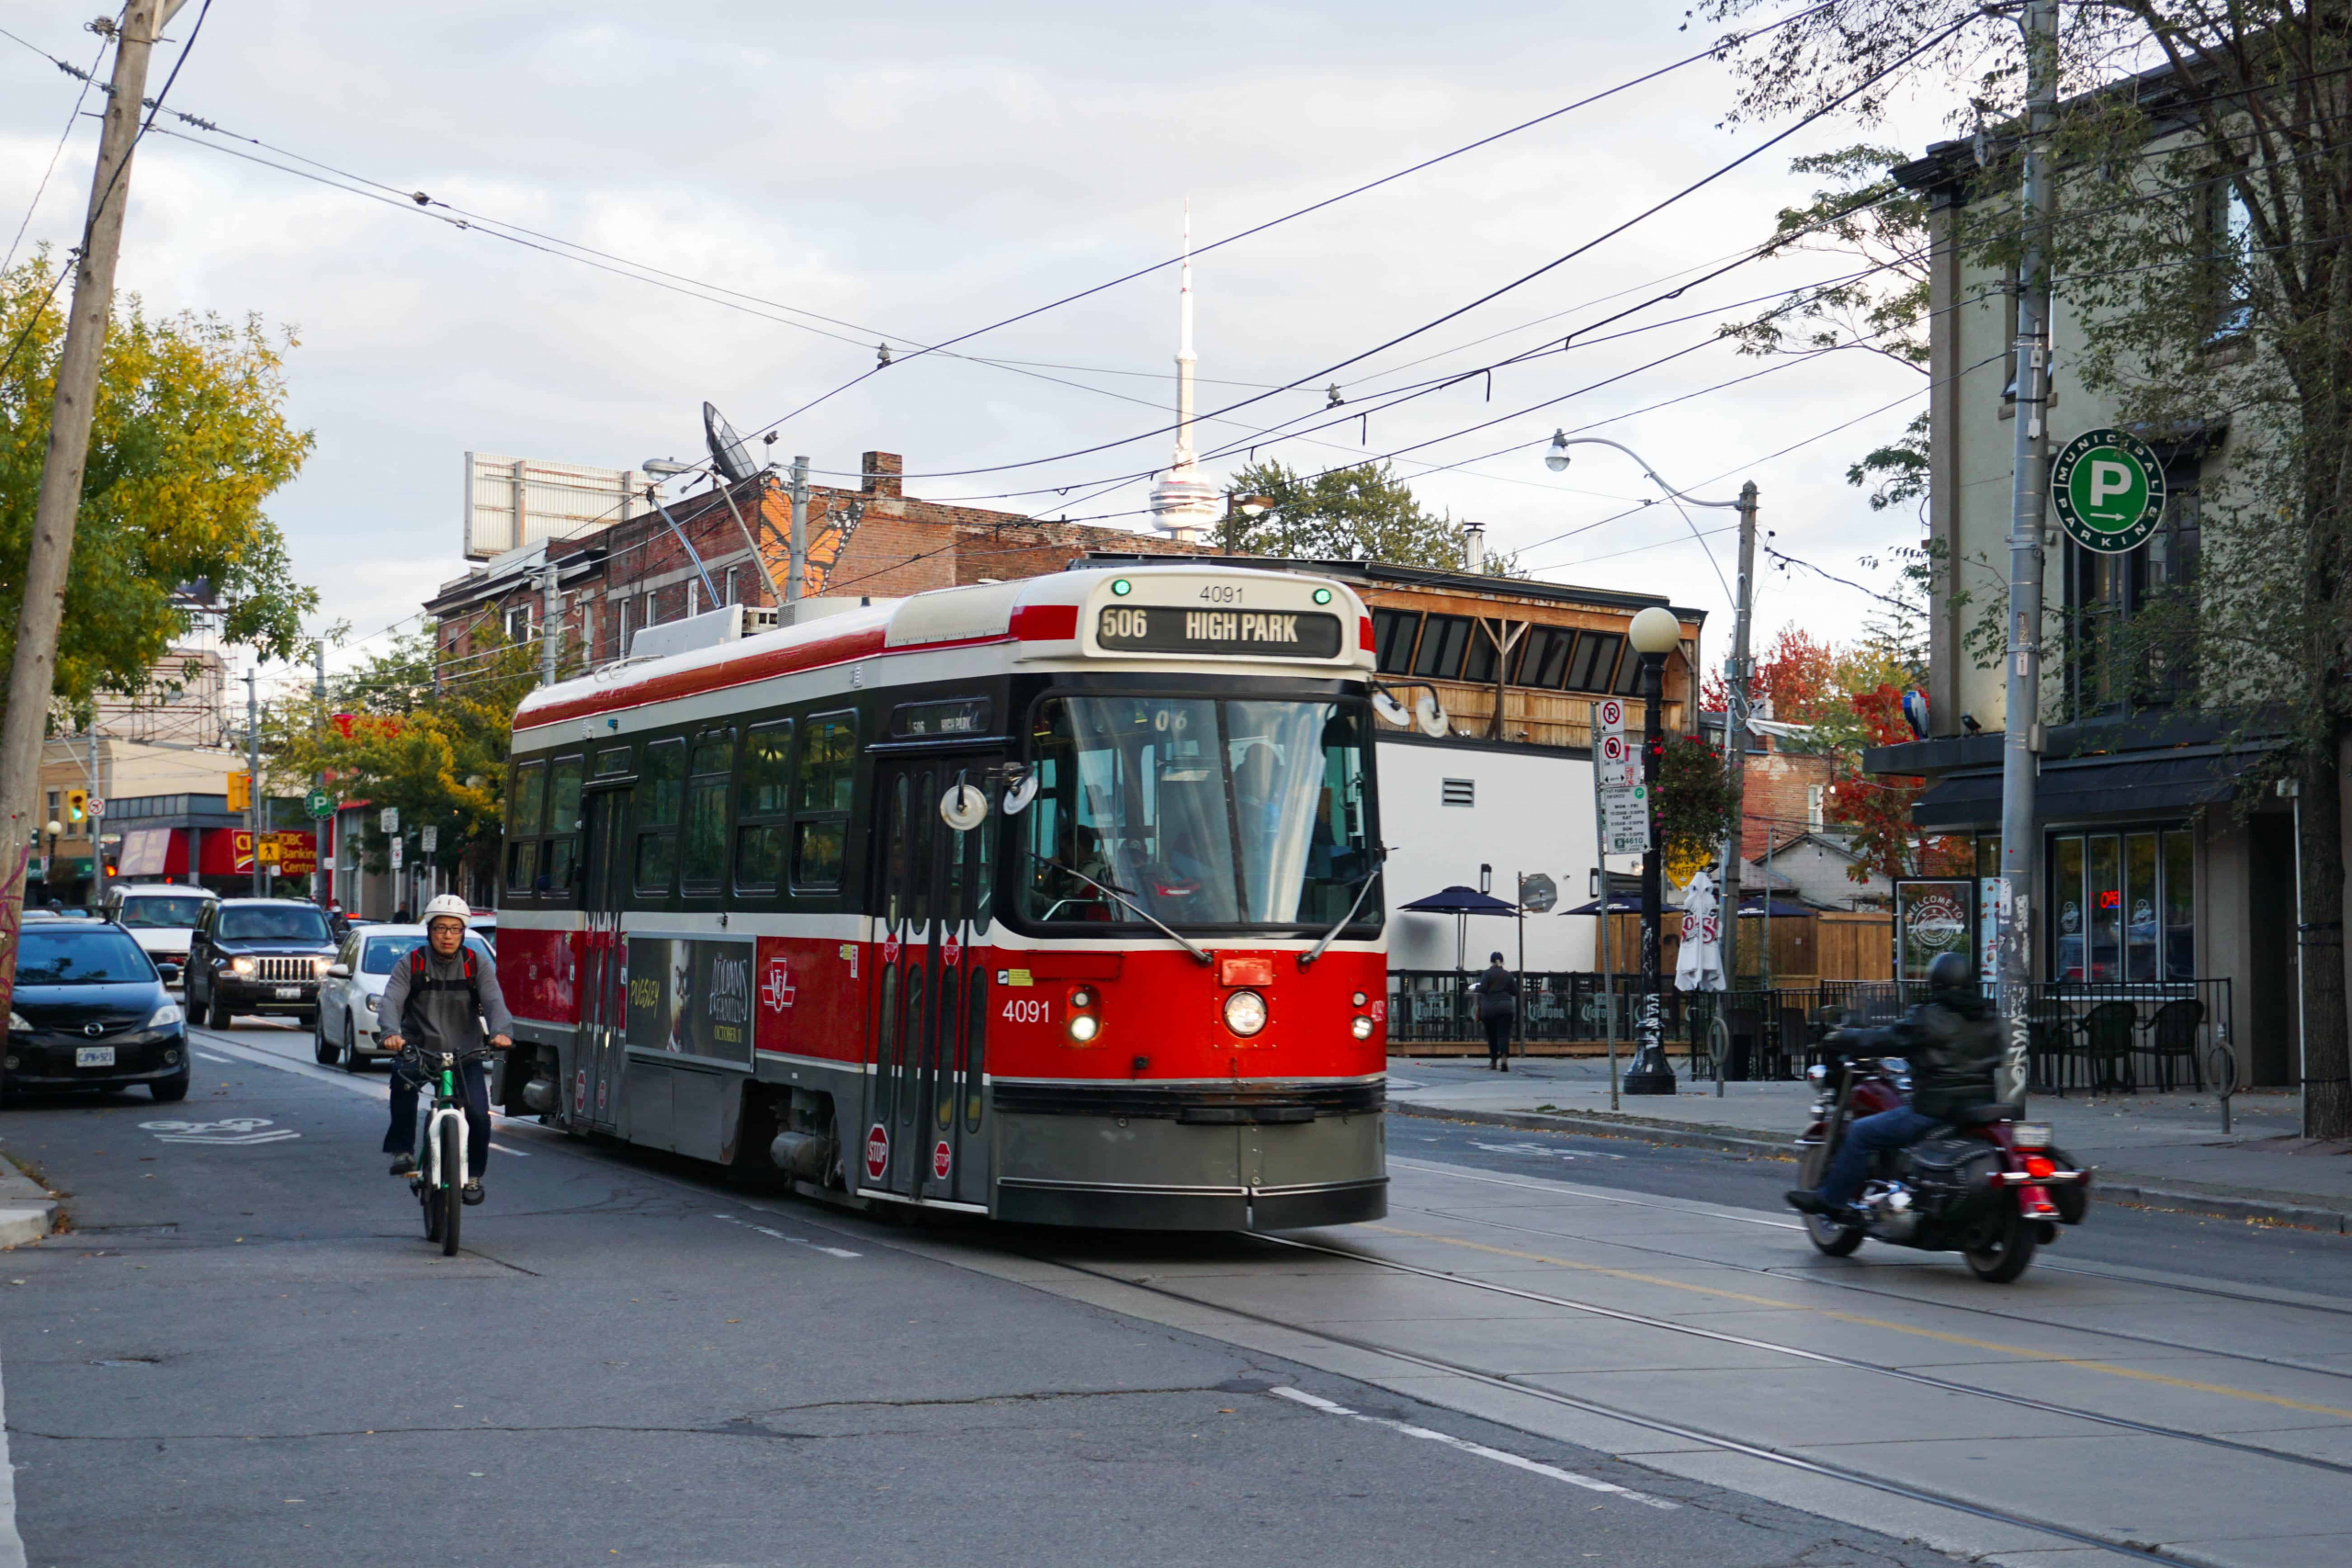 Most of the TTC’s funding comes from ridership, which has declined during COVID-19.JADINE NGAN/THE VARSITY